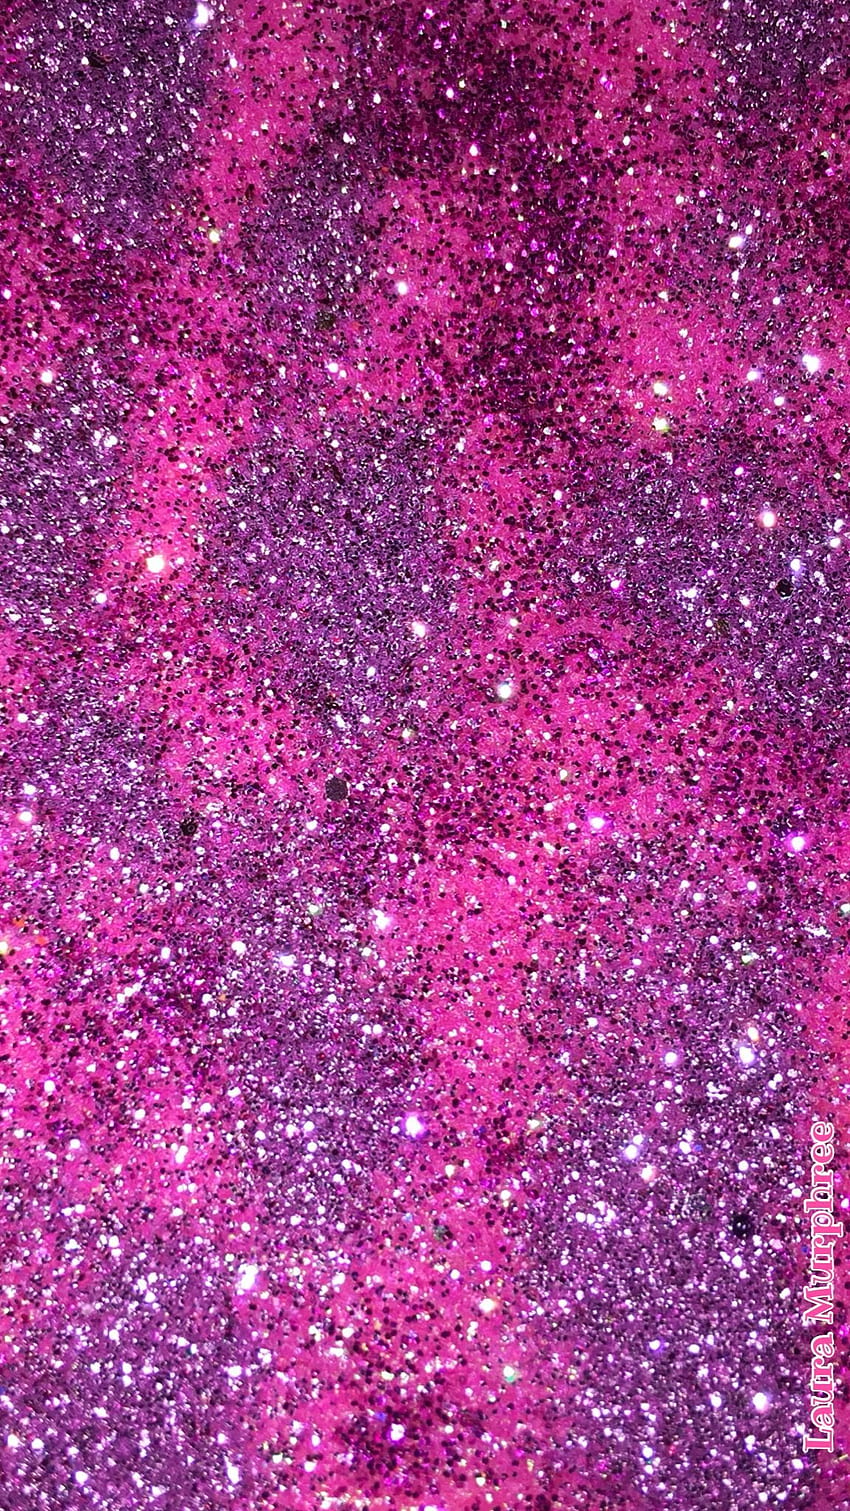 1366x768px, 720P Free download | Glitter phone sparkle background bling ...